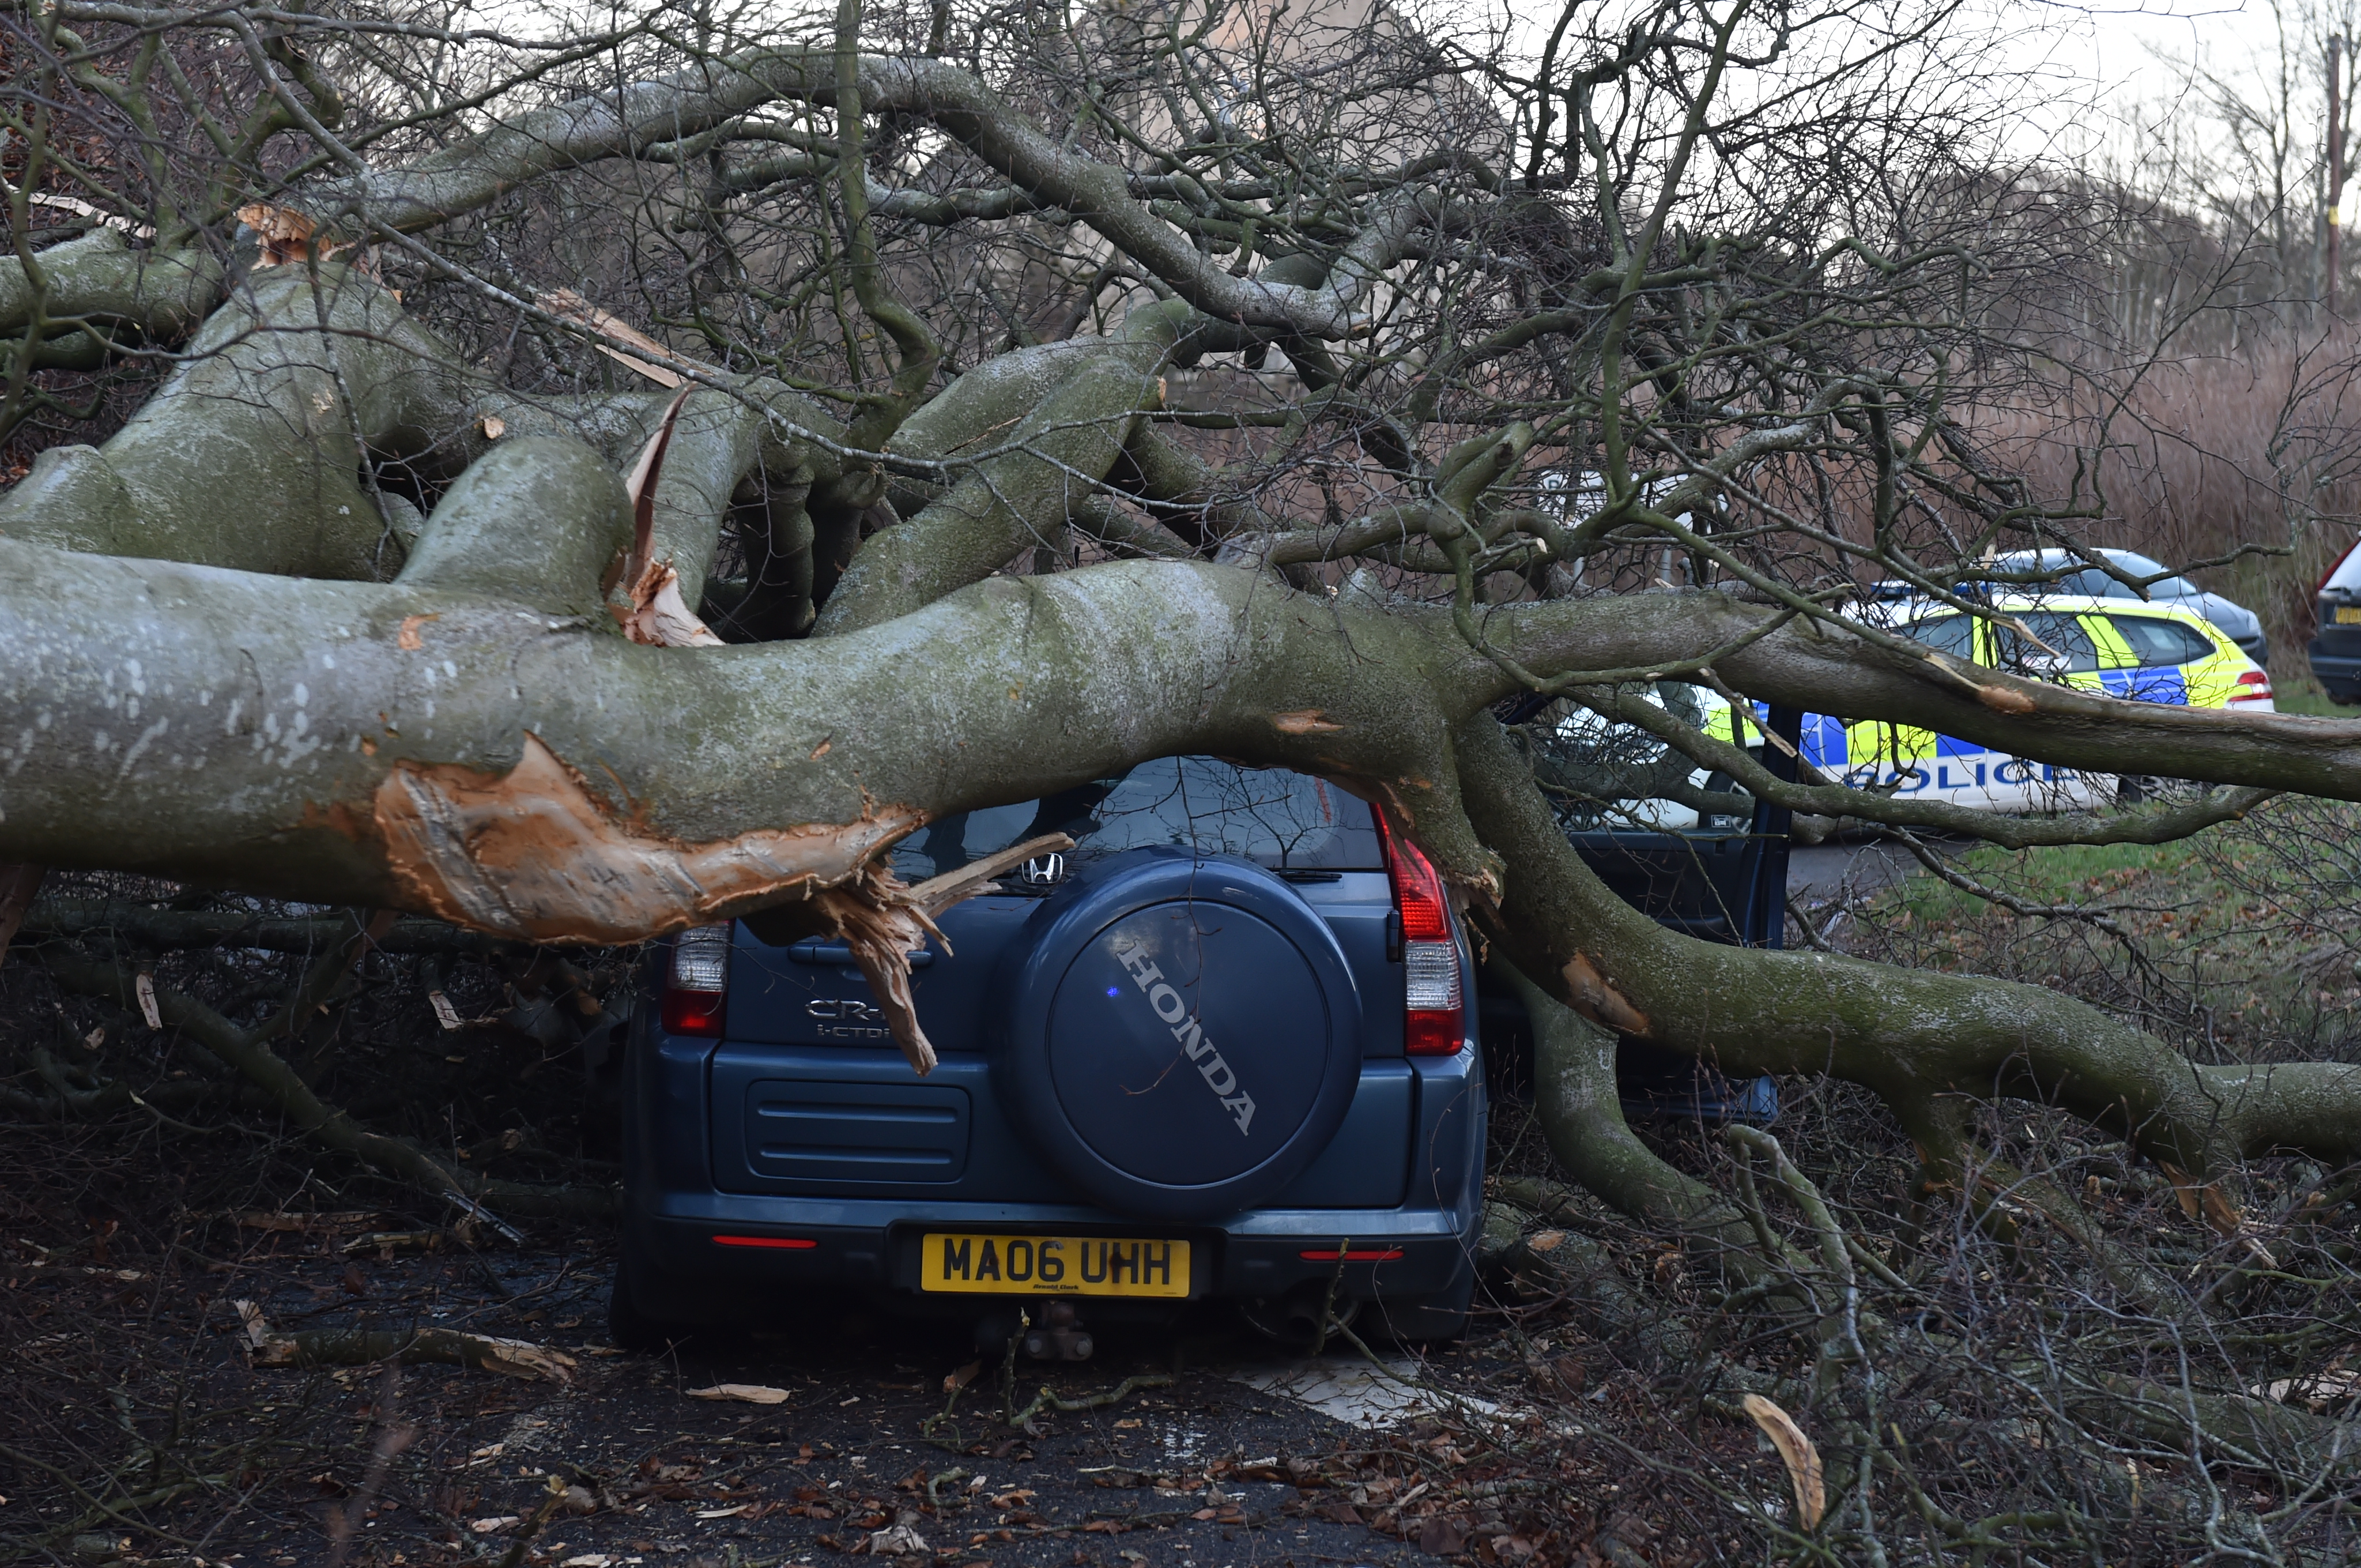 A tree crashed through a car in Aberdeen as high winds buffeted the region on Monday